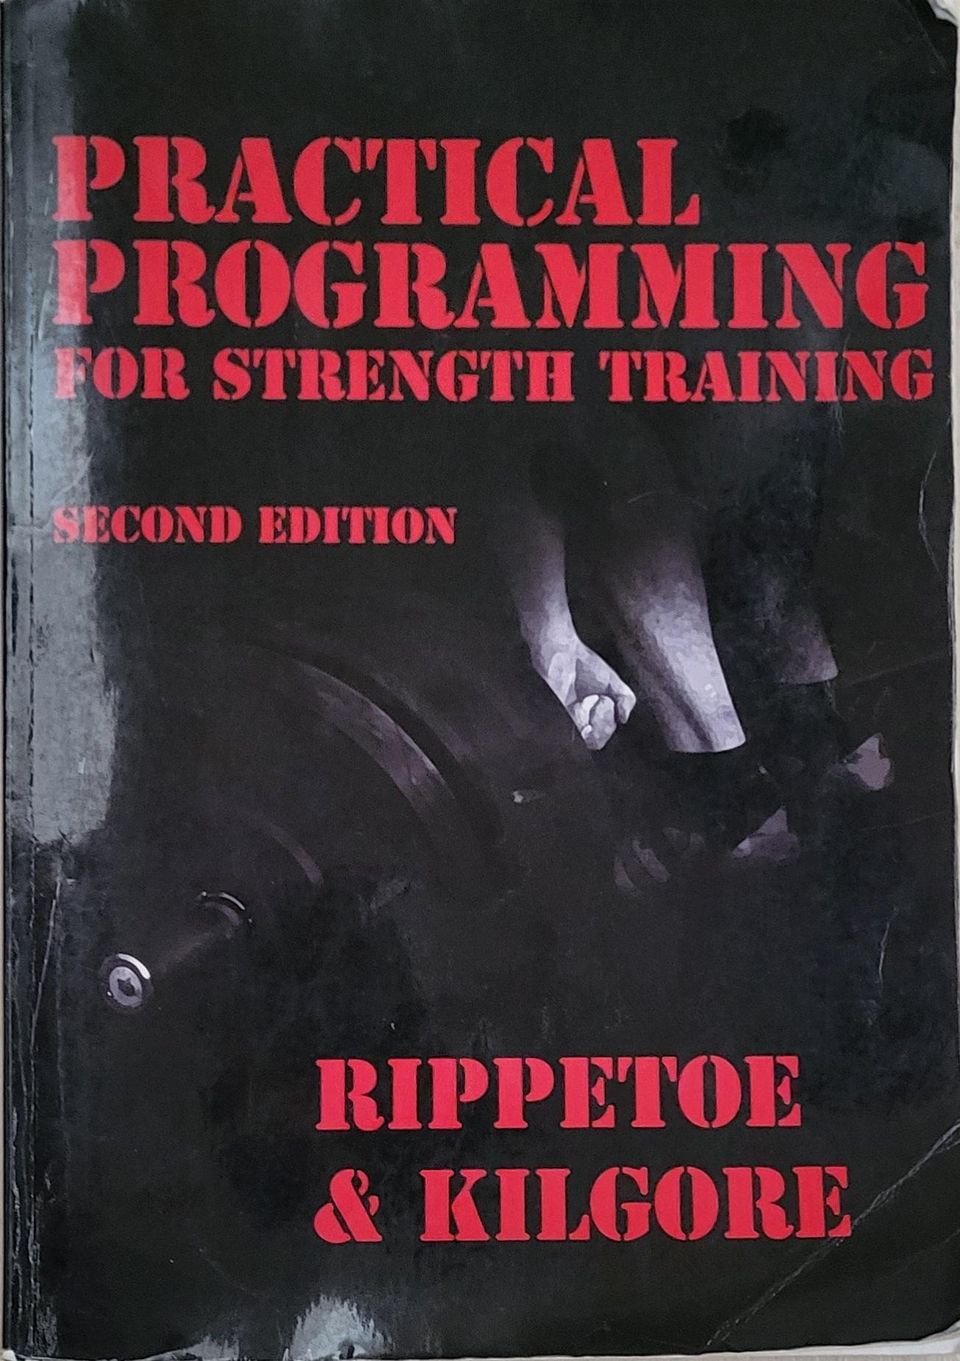 Practical Programming for Strength Training 2nd Edition